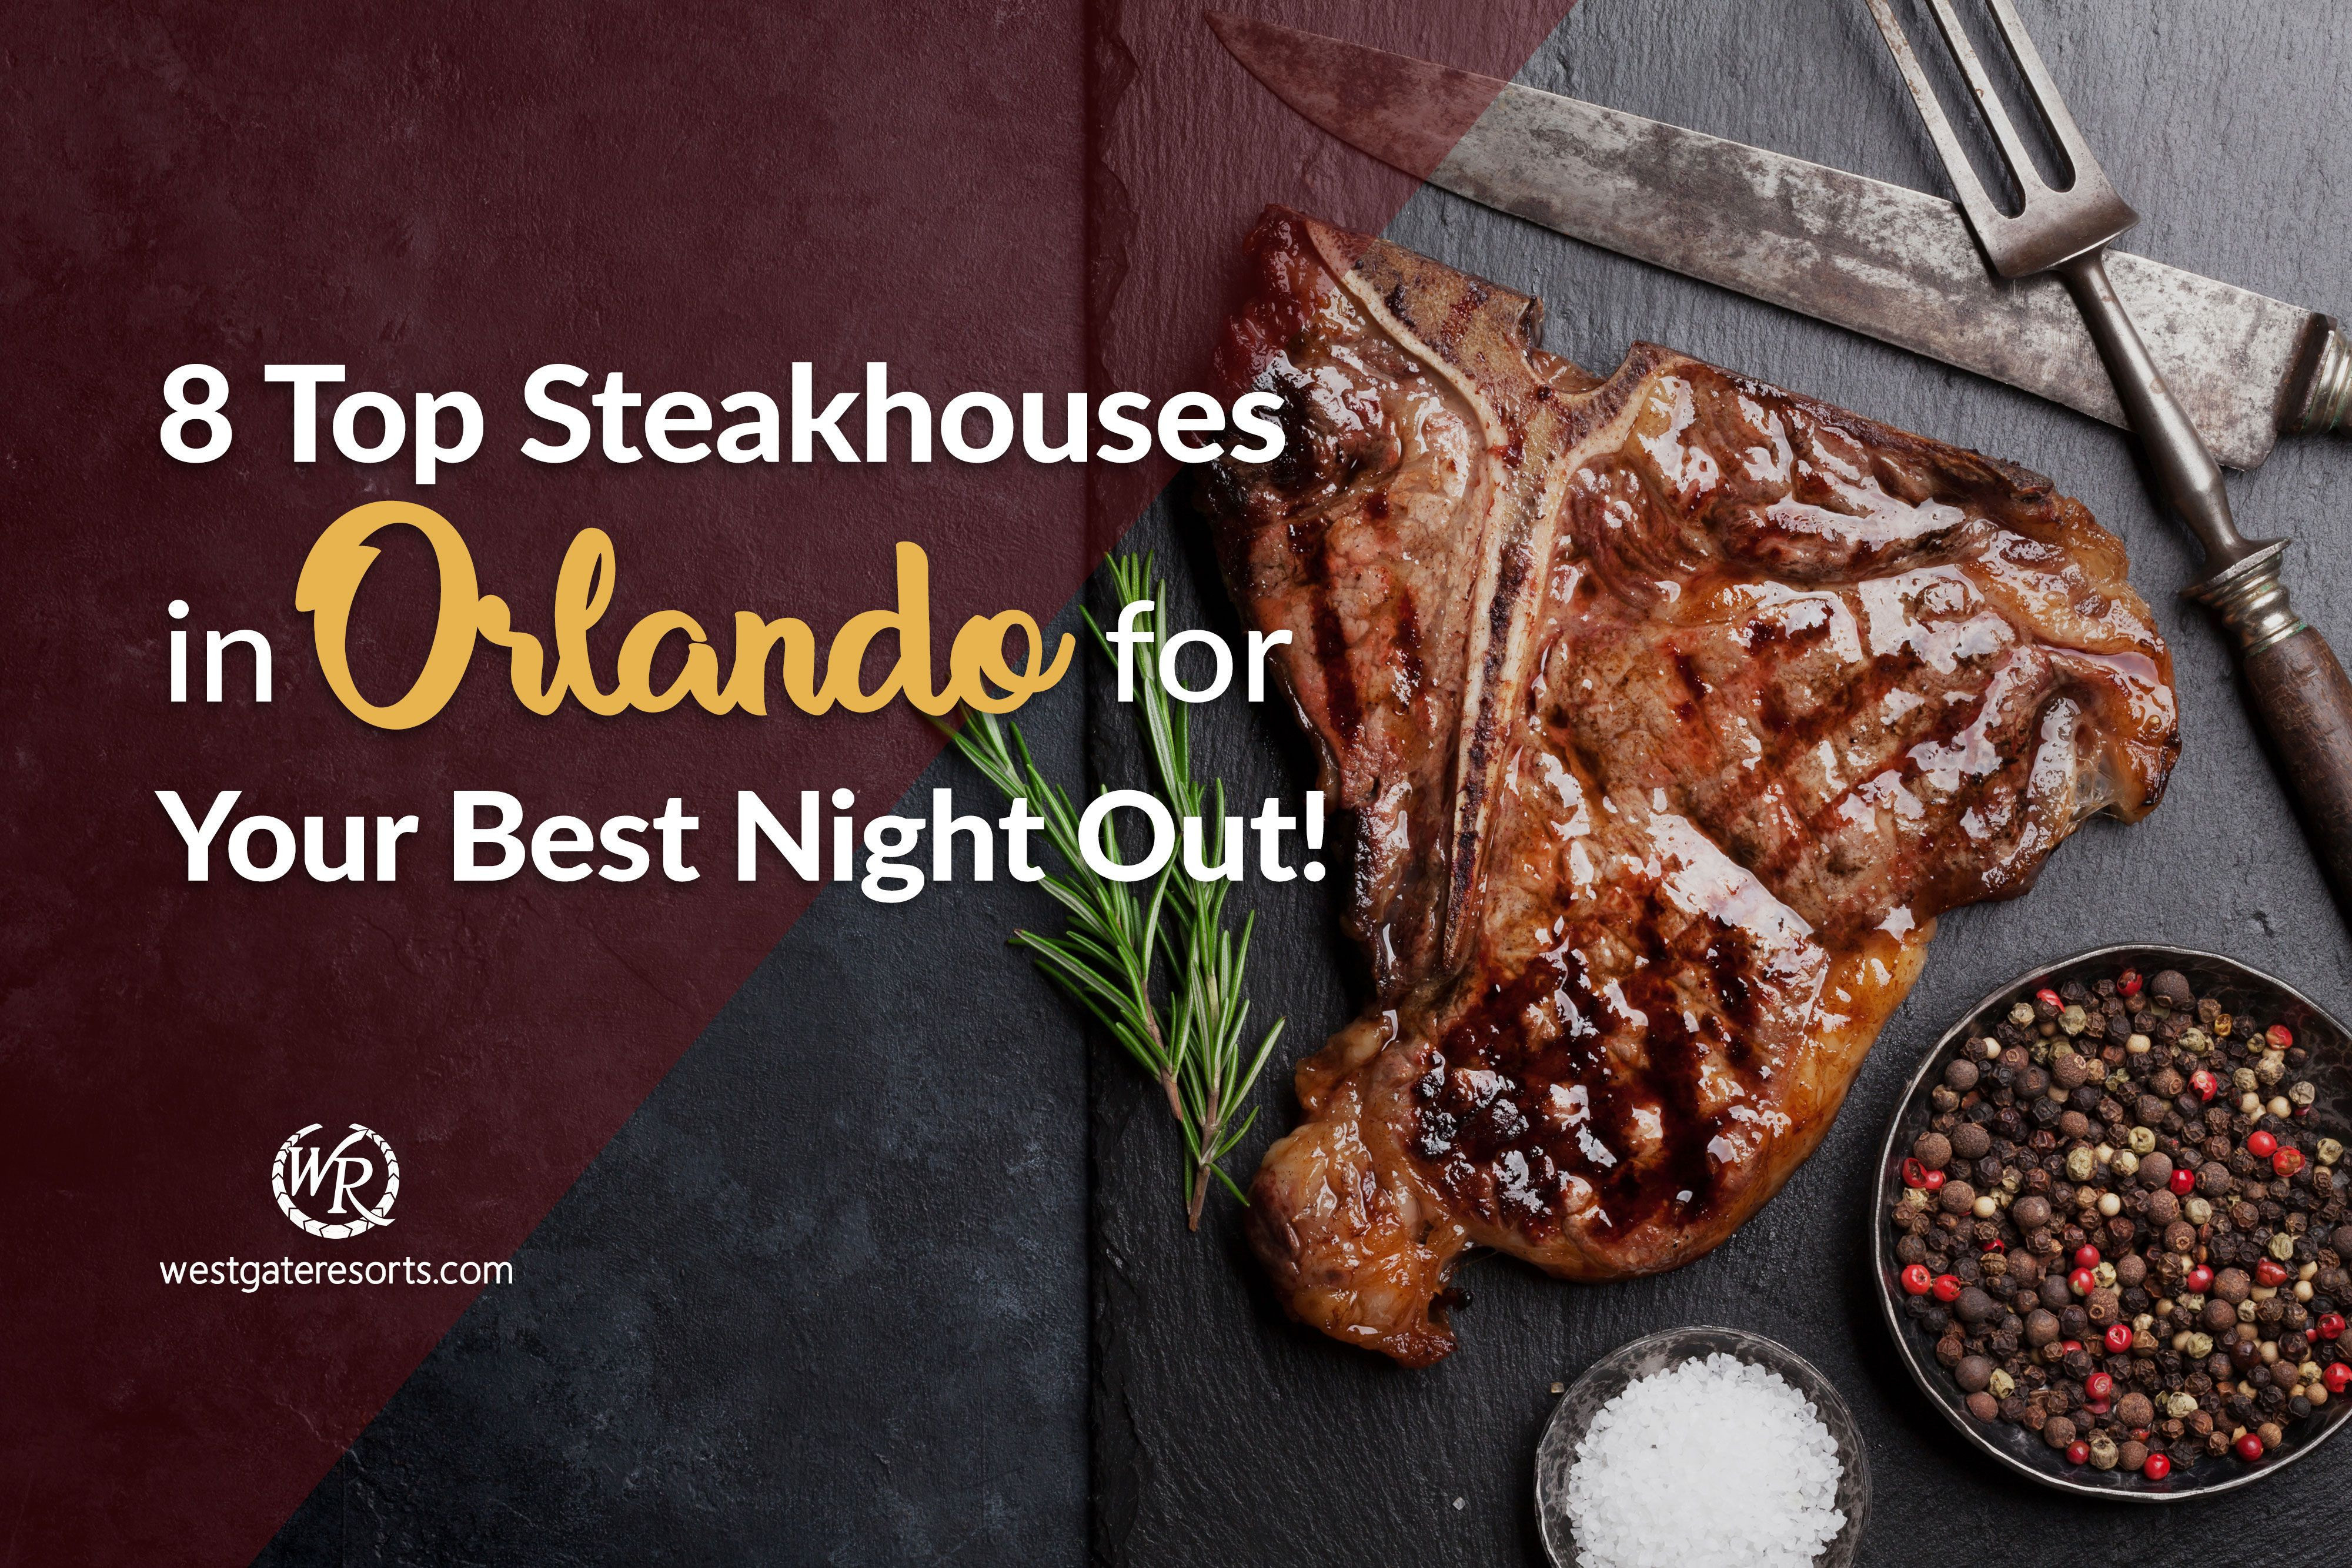 8 Top Steakhouses in Orlando for Your Best Night Out!